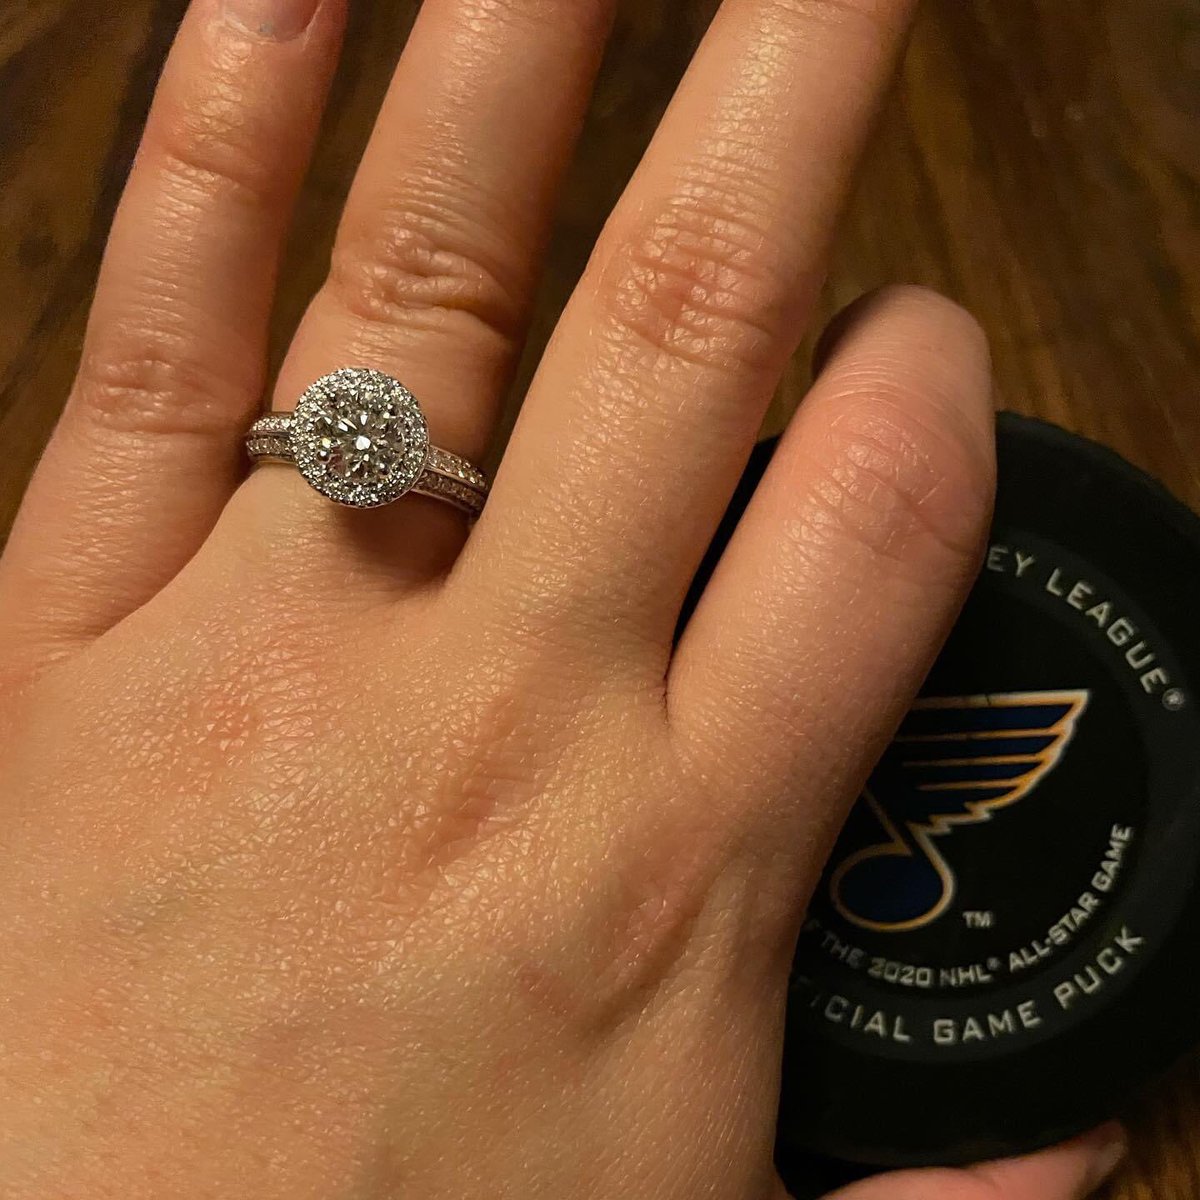 Feeling like the biggest winner in St. Louis! Thanks @StLouisBlues for the back drop and being the location of our first date and engagement. #ForeverFans #LGB #SheSaidYes